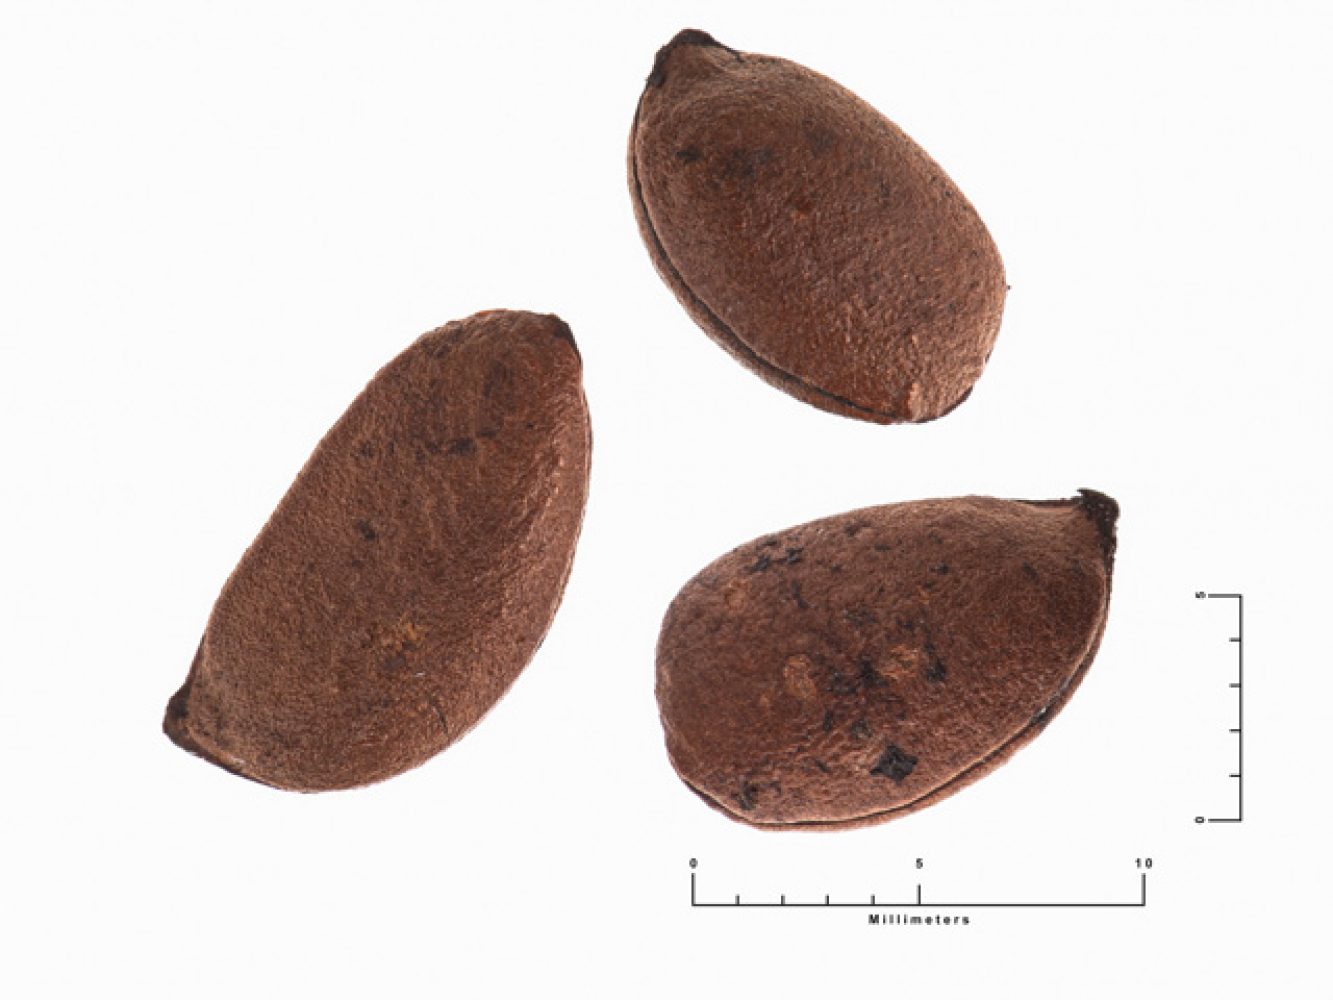 Diospyros texana Seeds, 2018
Leander, Bruce
Seed collection location not recorded.
Native Seed Imaging Project